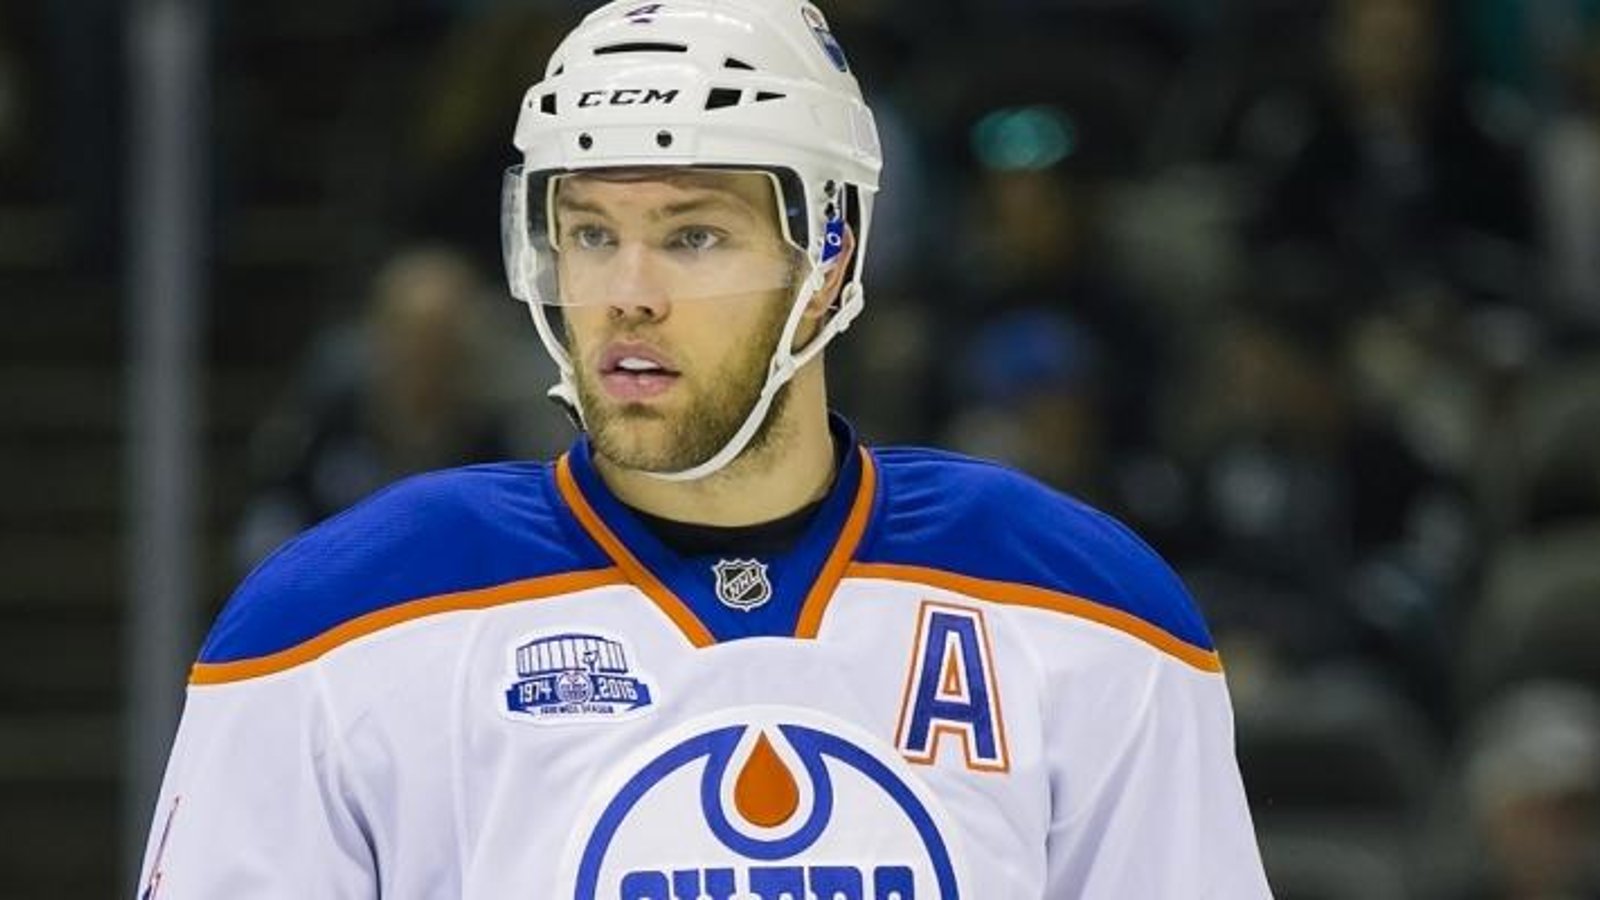 Taylor Hall gives former teammate McDavid one of the biggest compliments imaginable.